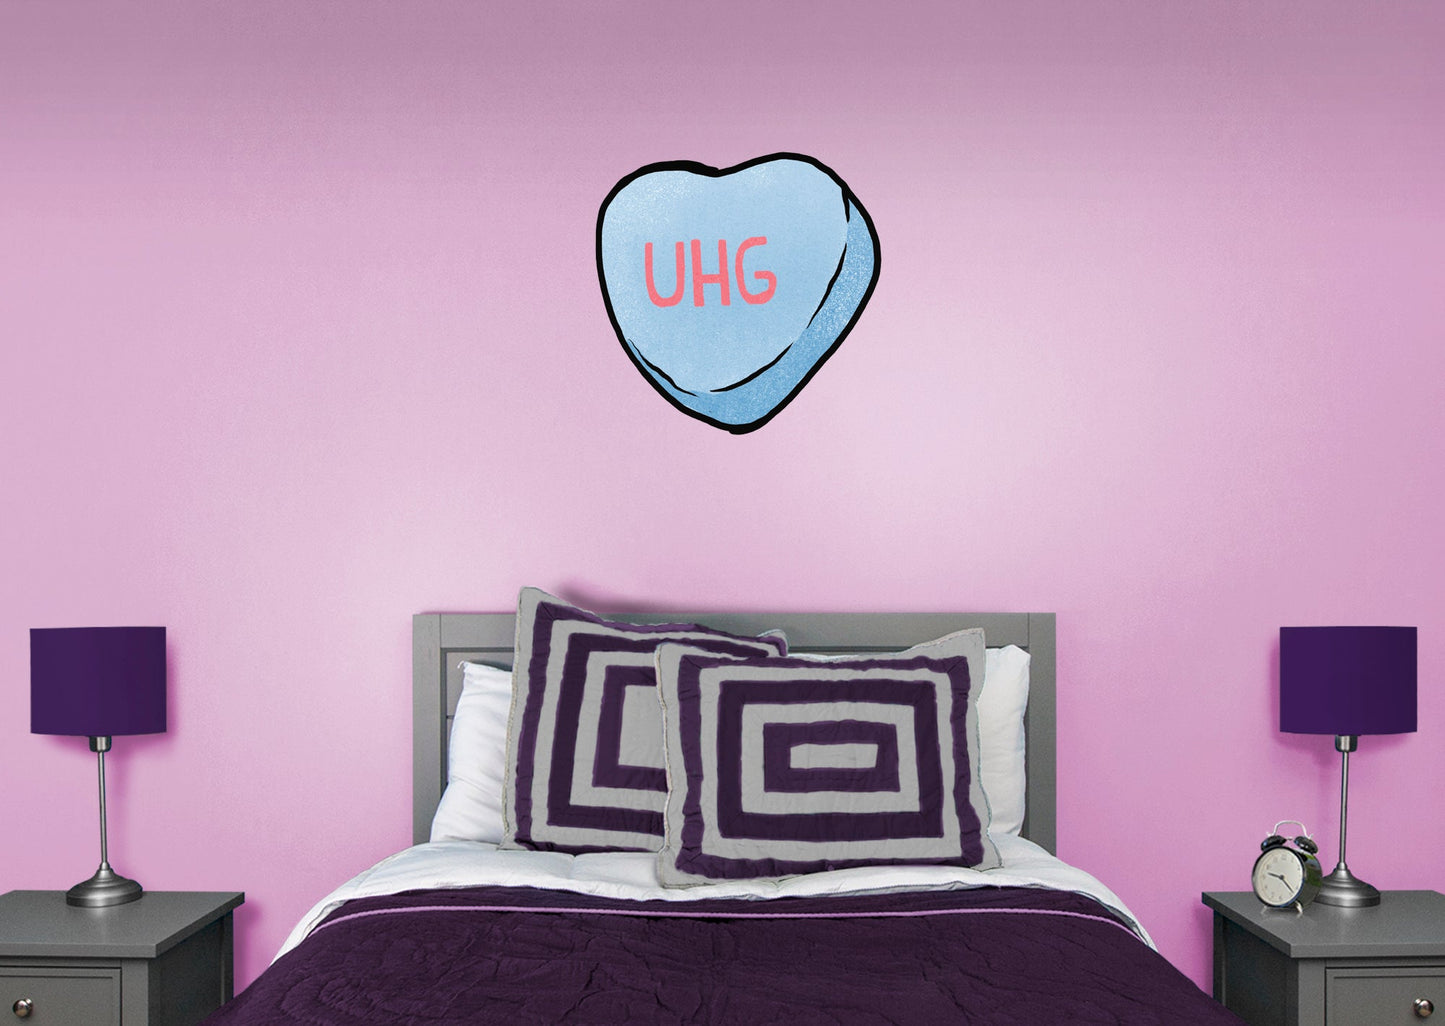 Ugh Heart        - Officially Licensed Big Moods Removable     Adhesive Decal